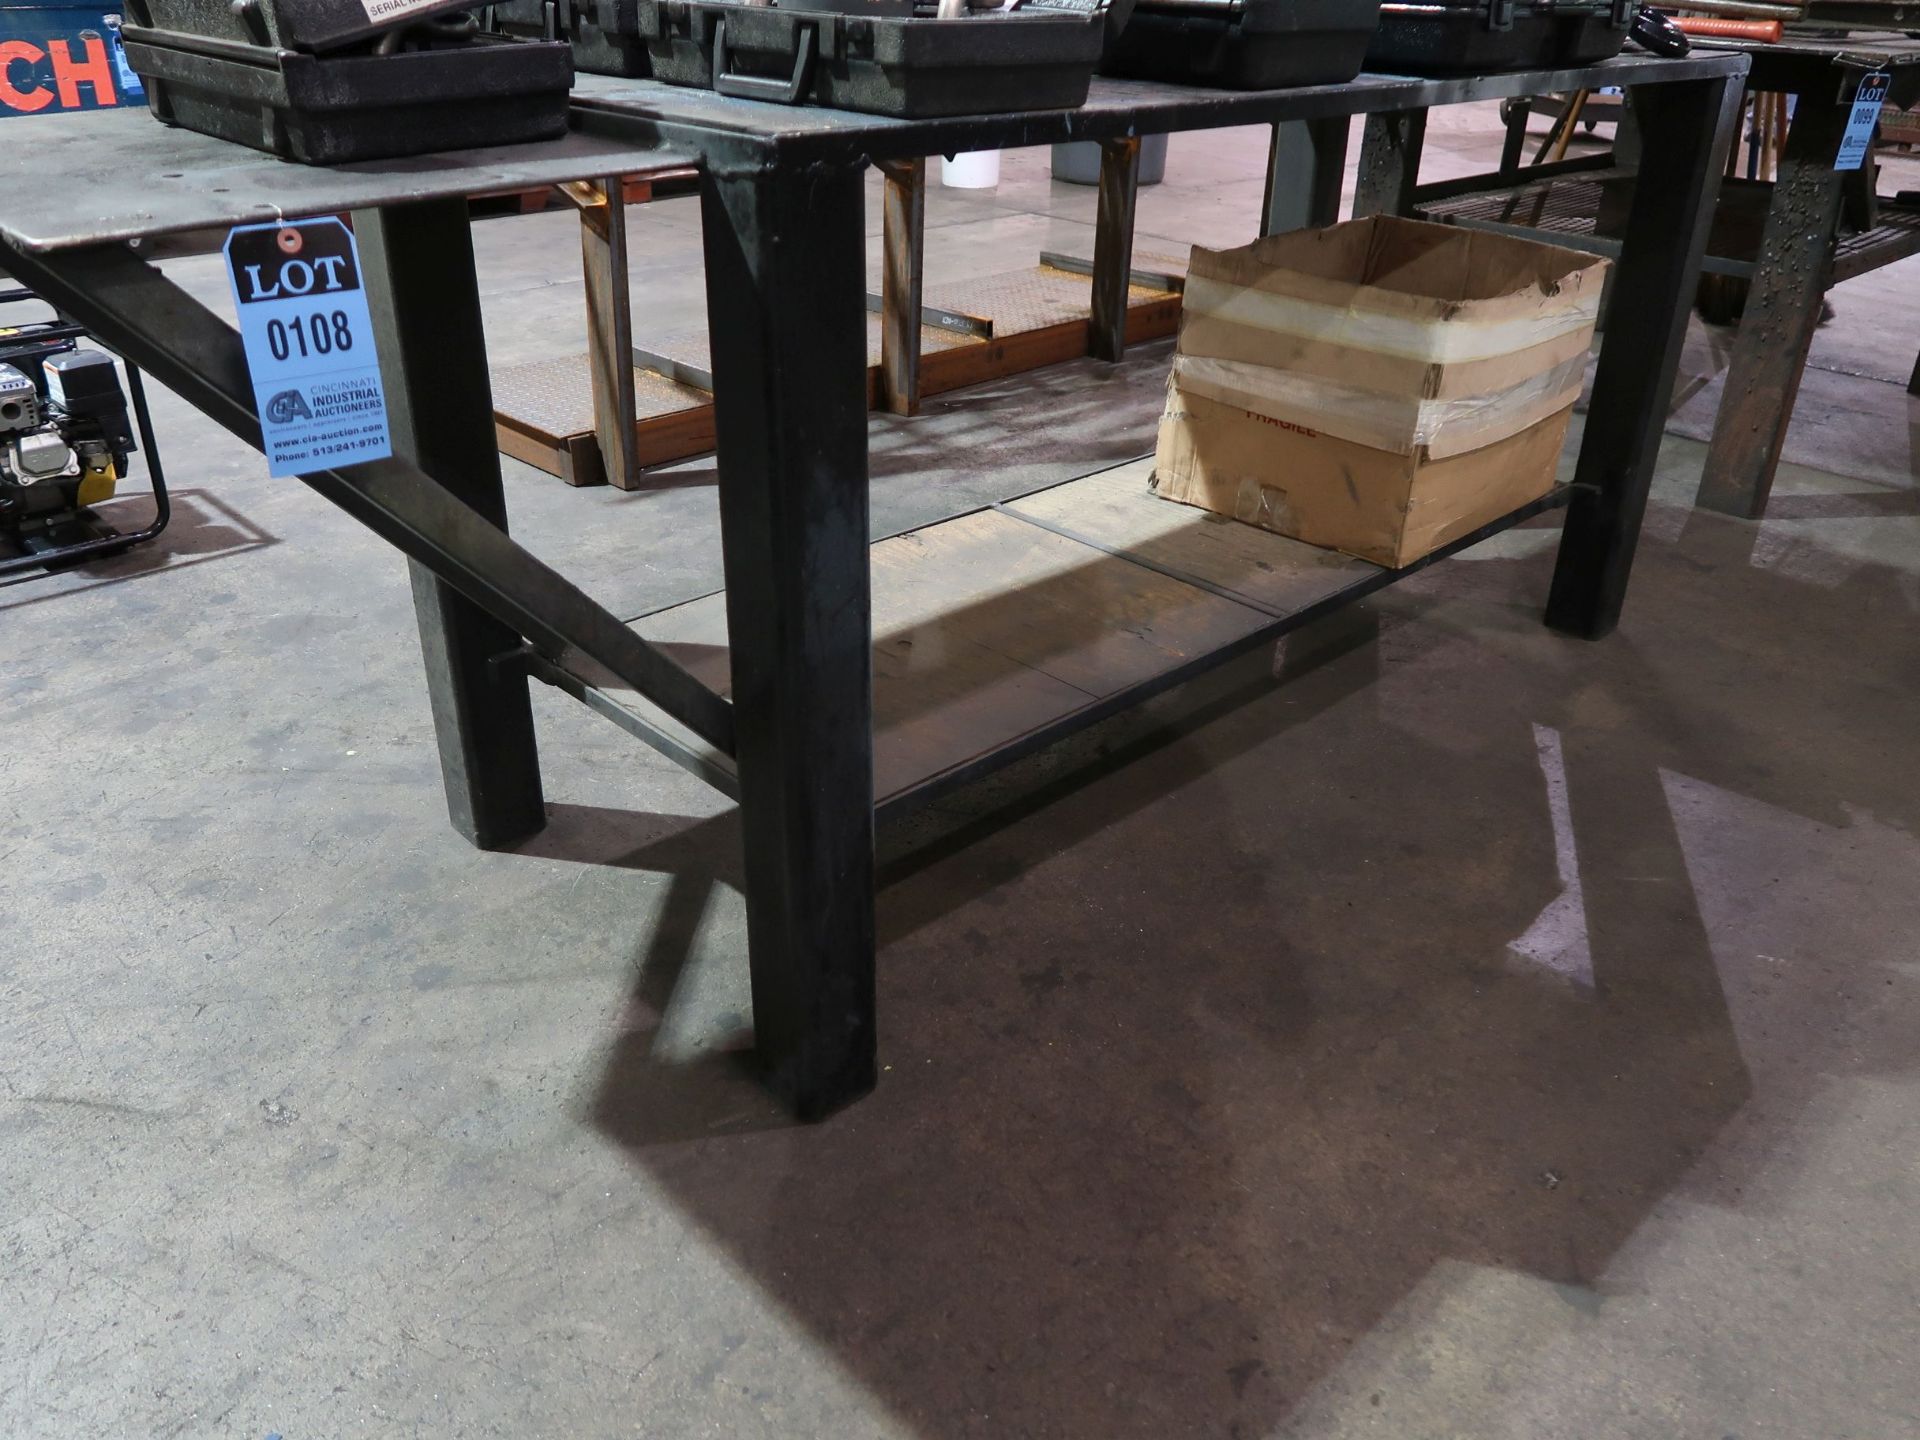 30" X 72" X 36" HIGH WELDED STEEL FRAME WOOD TOP TABLE **DELAY REMOVAL - PICK UP 10-16-18**